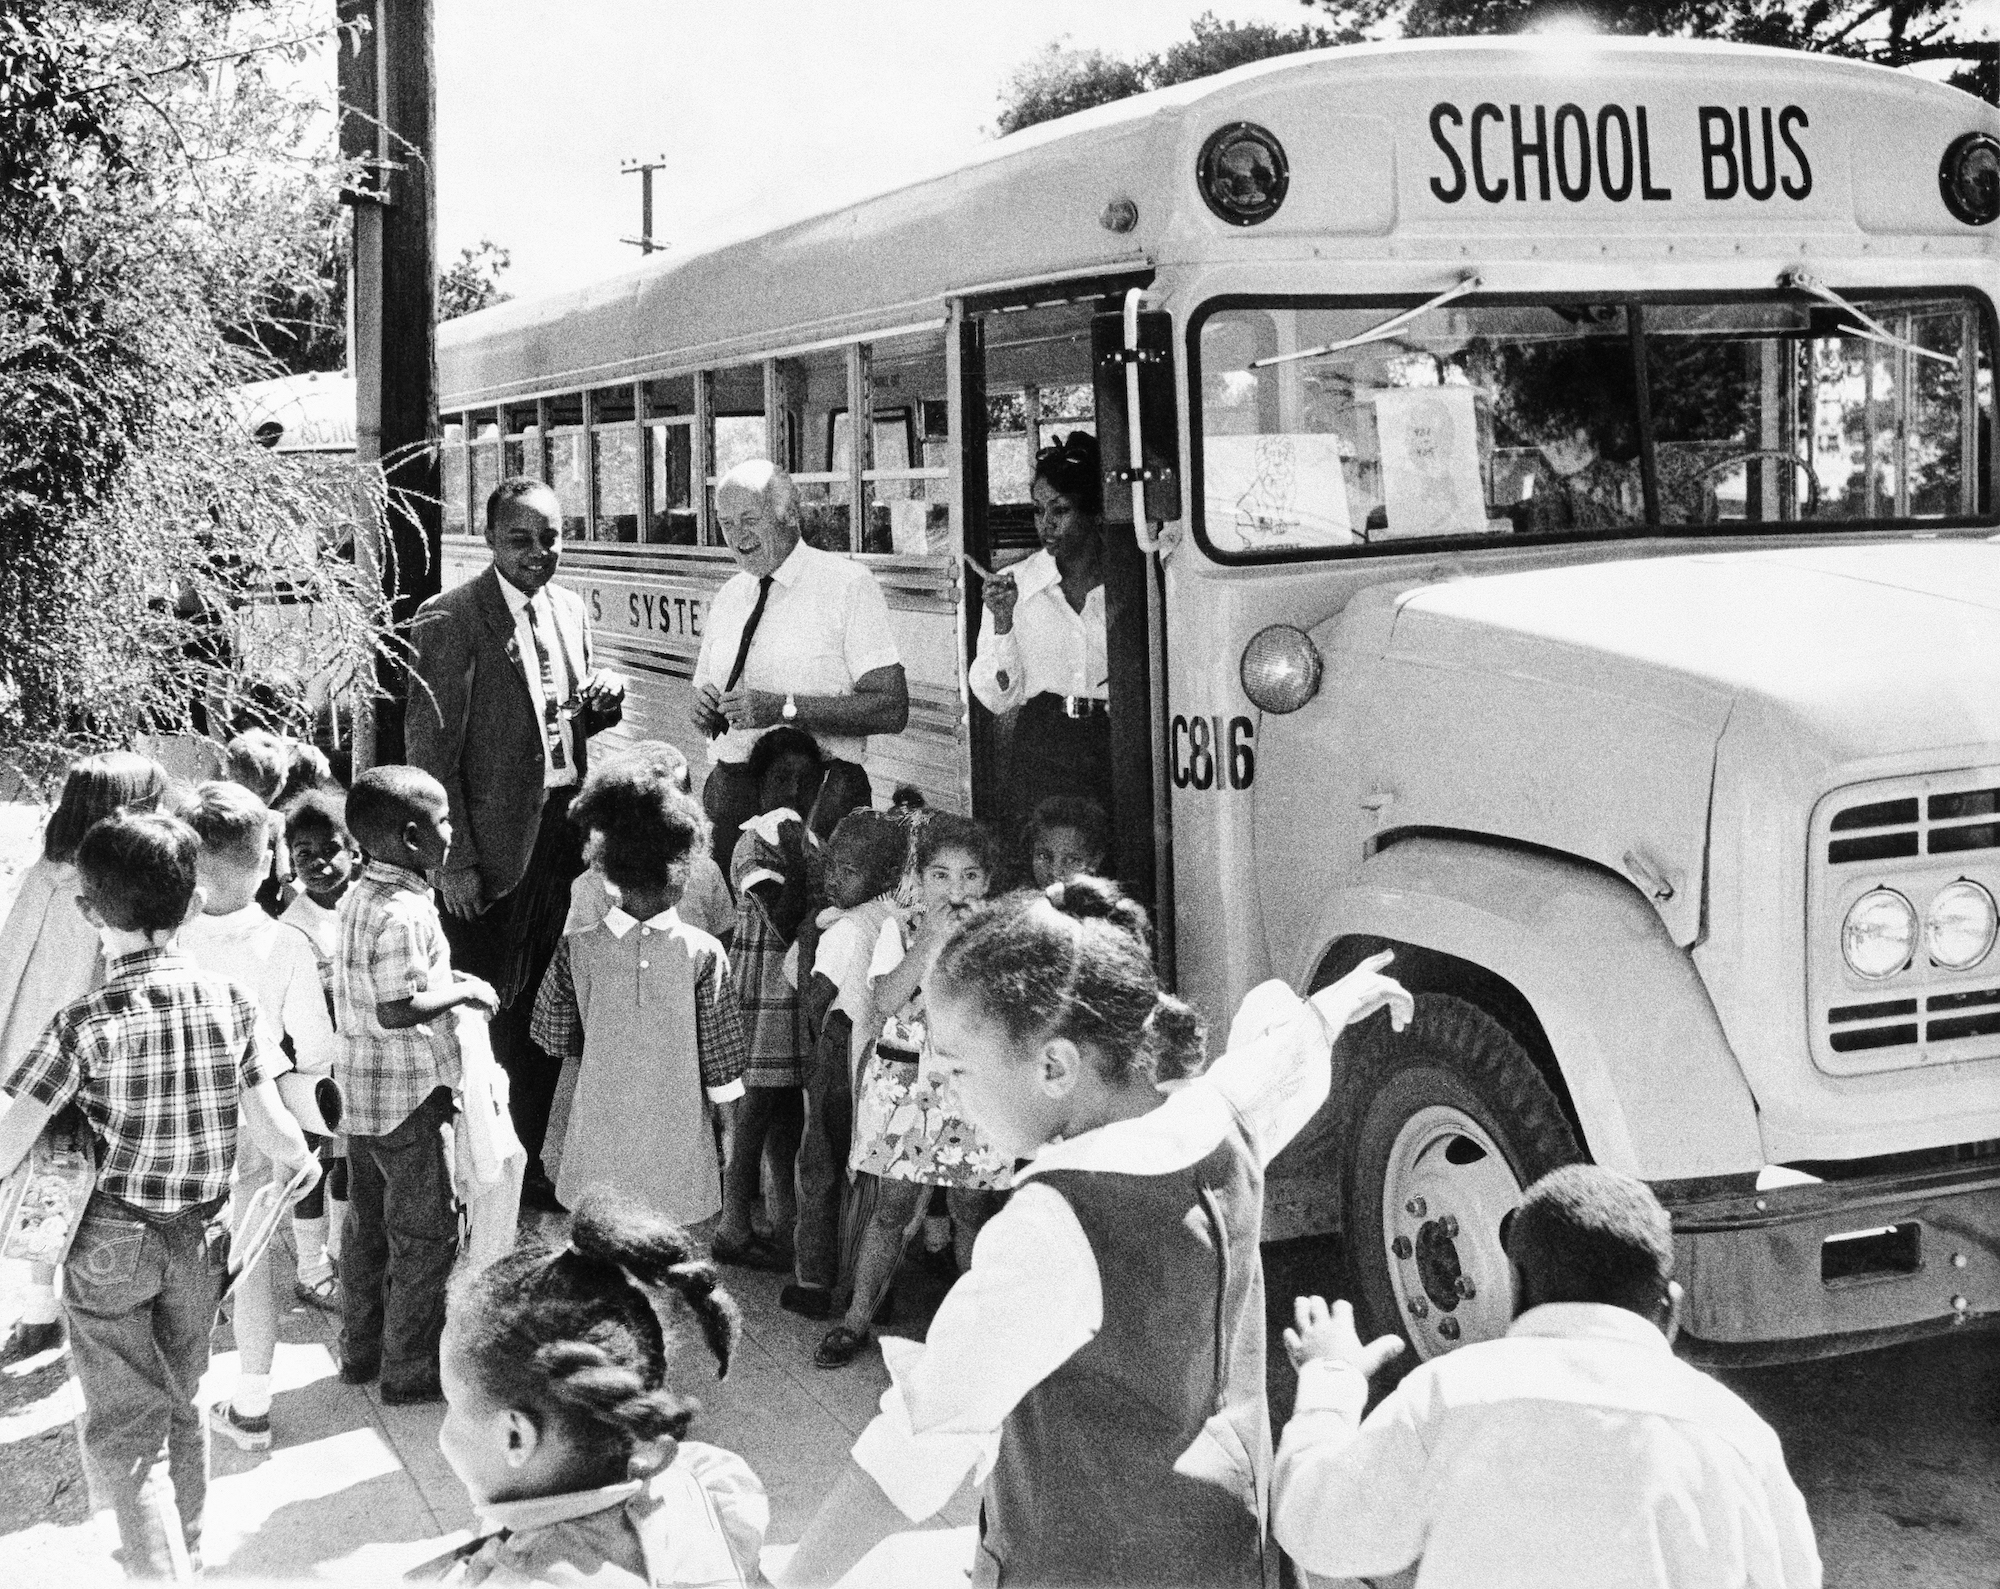 A black and white photo of Black children heading for a school bus while adults supervise